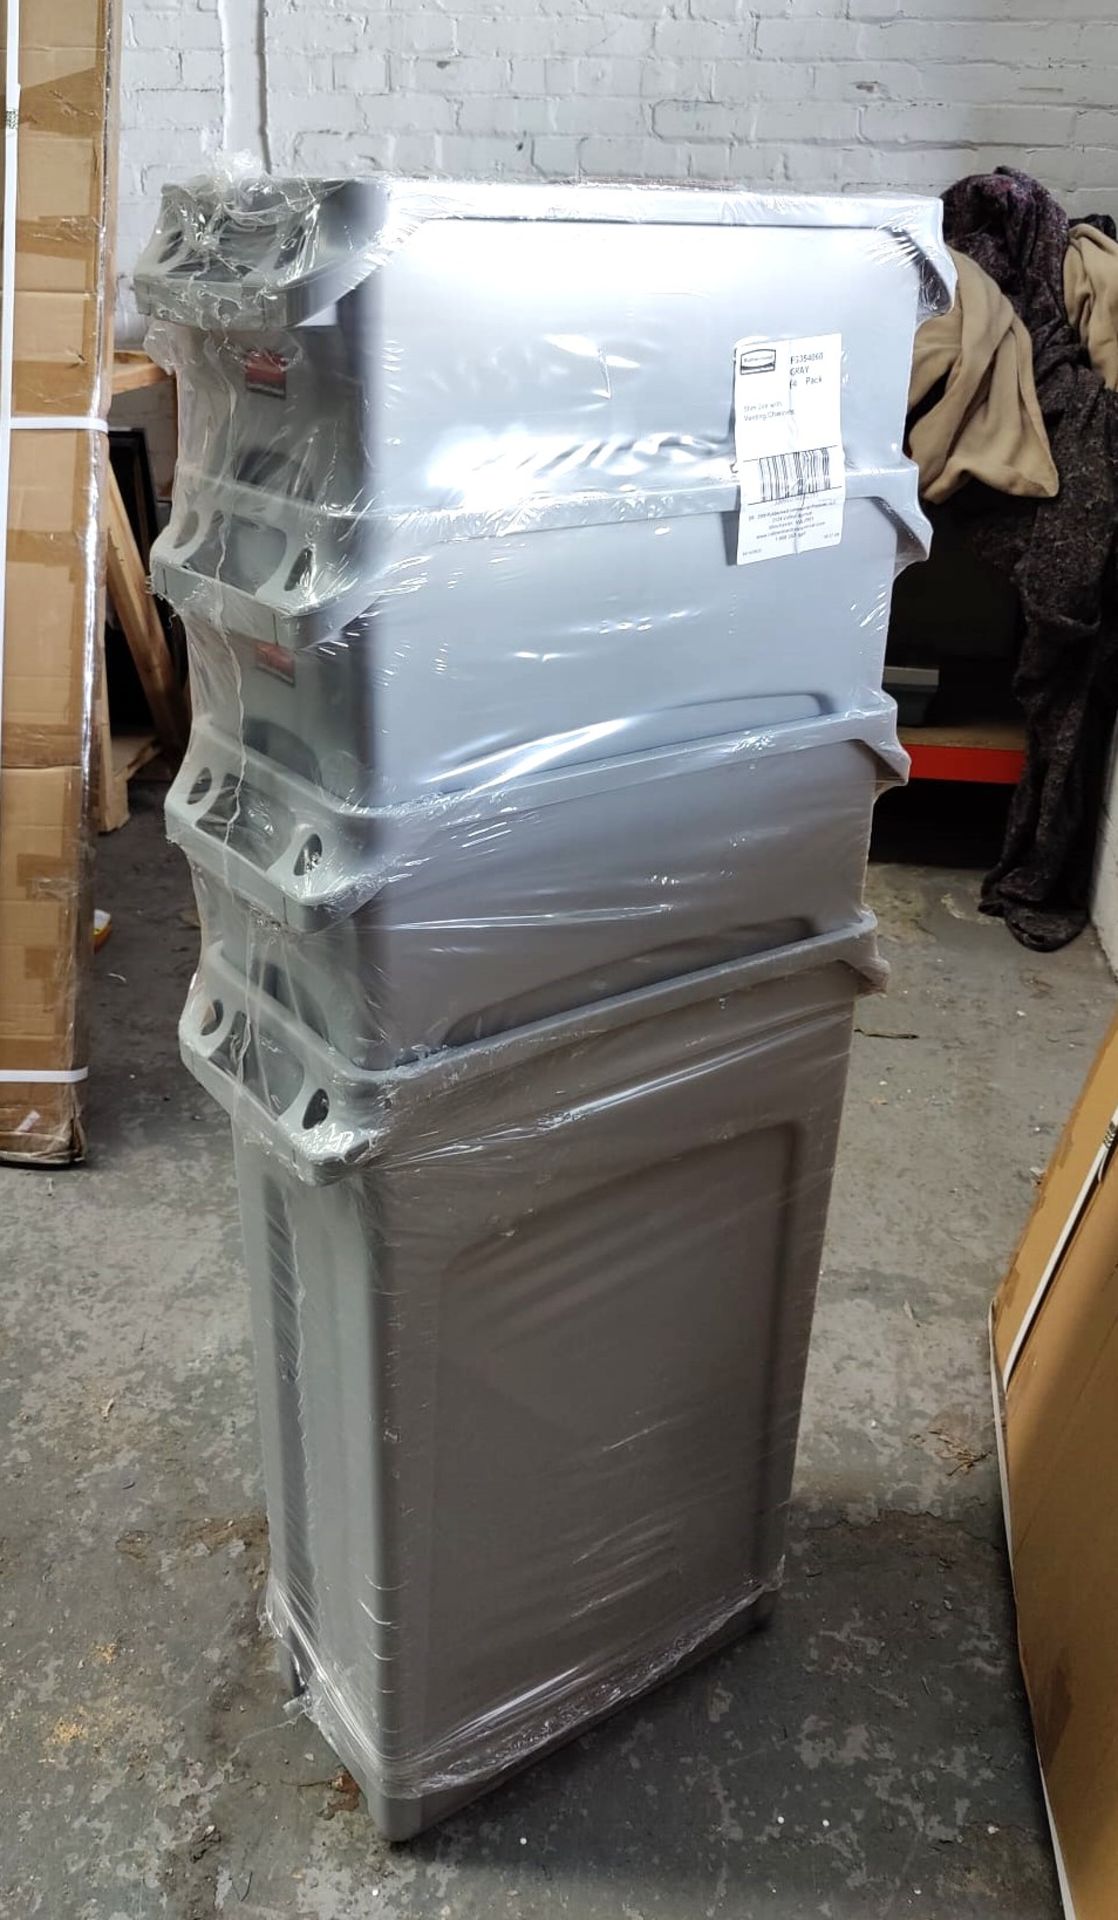 1 x Rubbermaid Slim Jim Waste Bin With Venting Channels Colour: Grey - Type: FG354060 - Brand New - Image 2 of 5